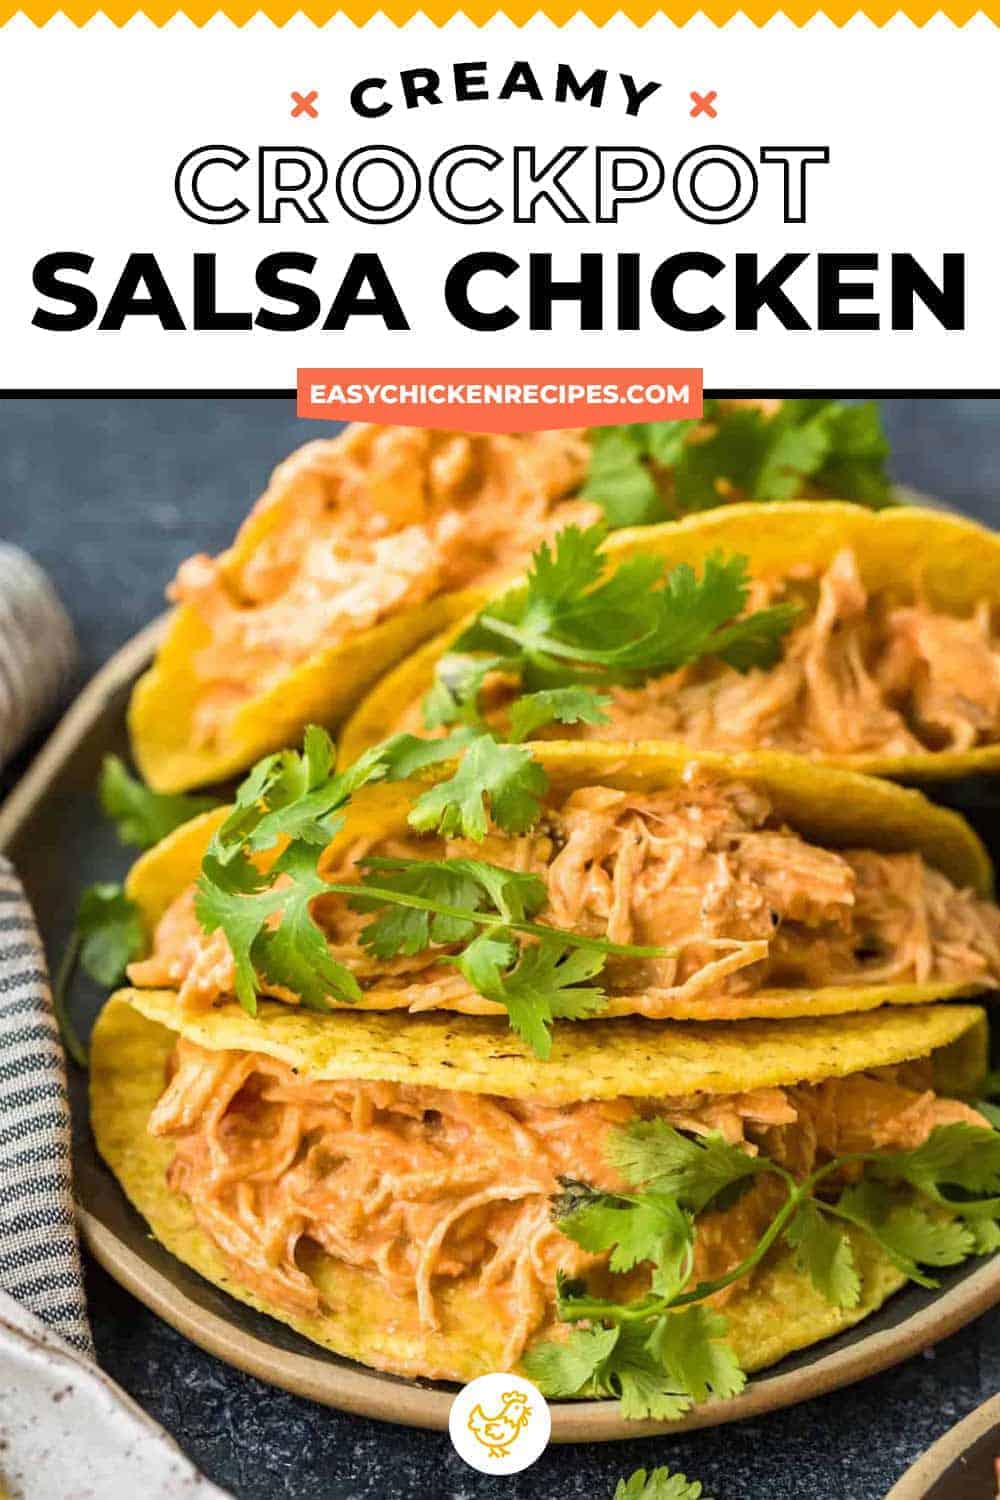 Crockpot Salsa Chicken - Only 3 Ingredients (For Tacos and More) VIDEO